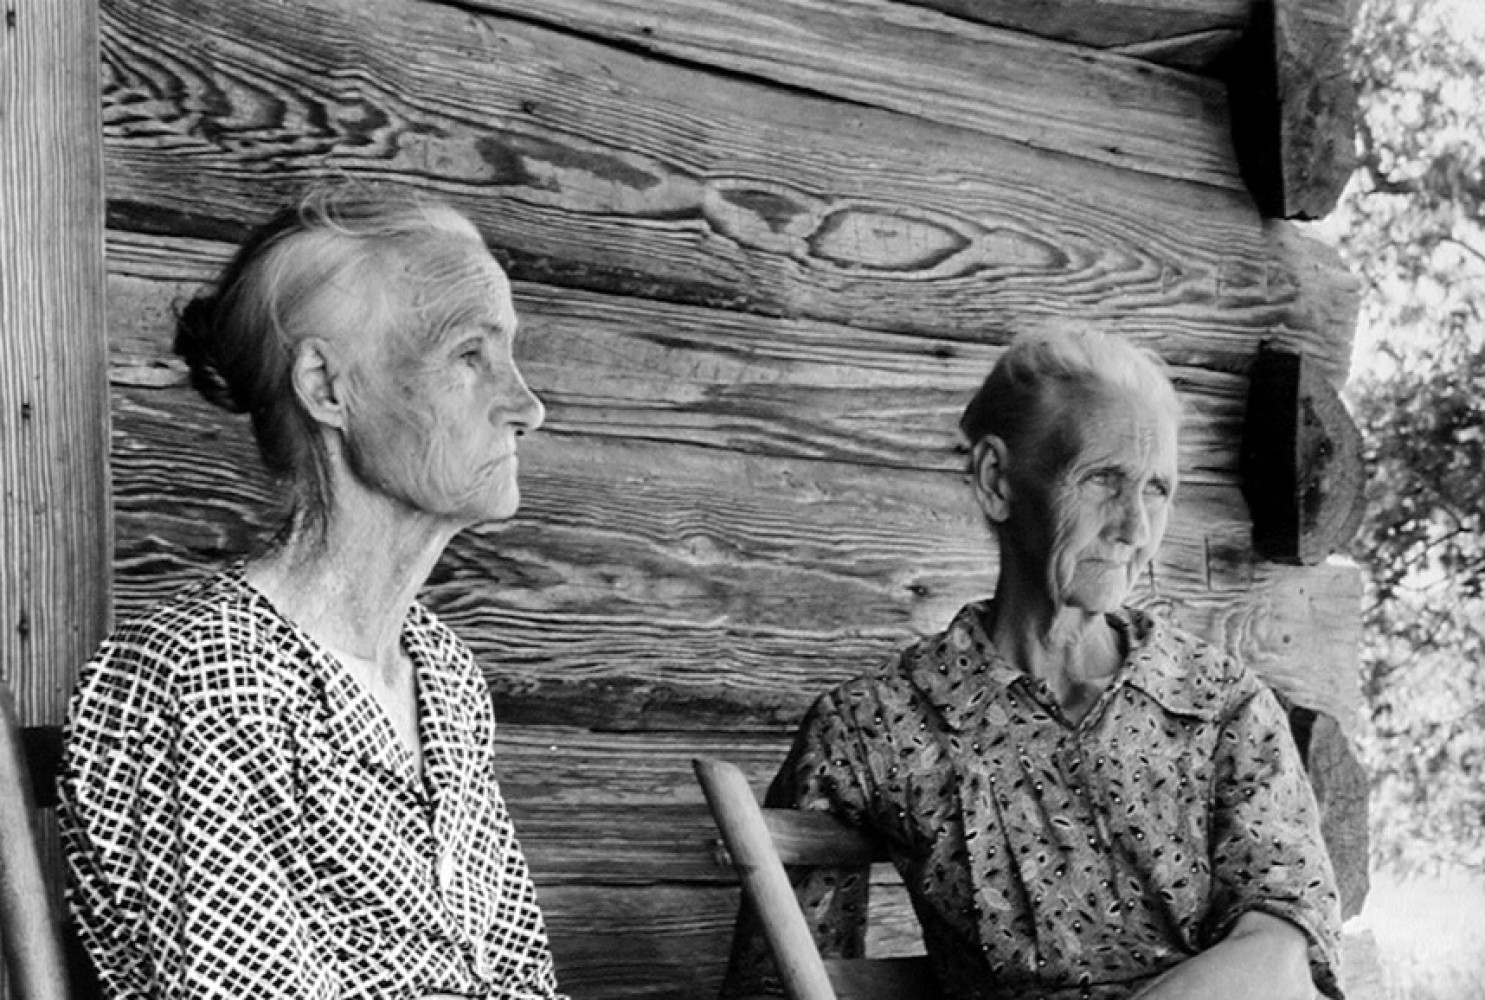 In Old Age, Lansdale, Arkansas (detail), 1937, By Margaret Bourke-White (American, 1904 - 1971); Gelatin silver print; Gift of Mr. Robert W. Marks
1974.012.0016
